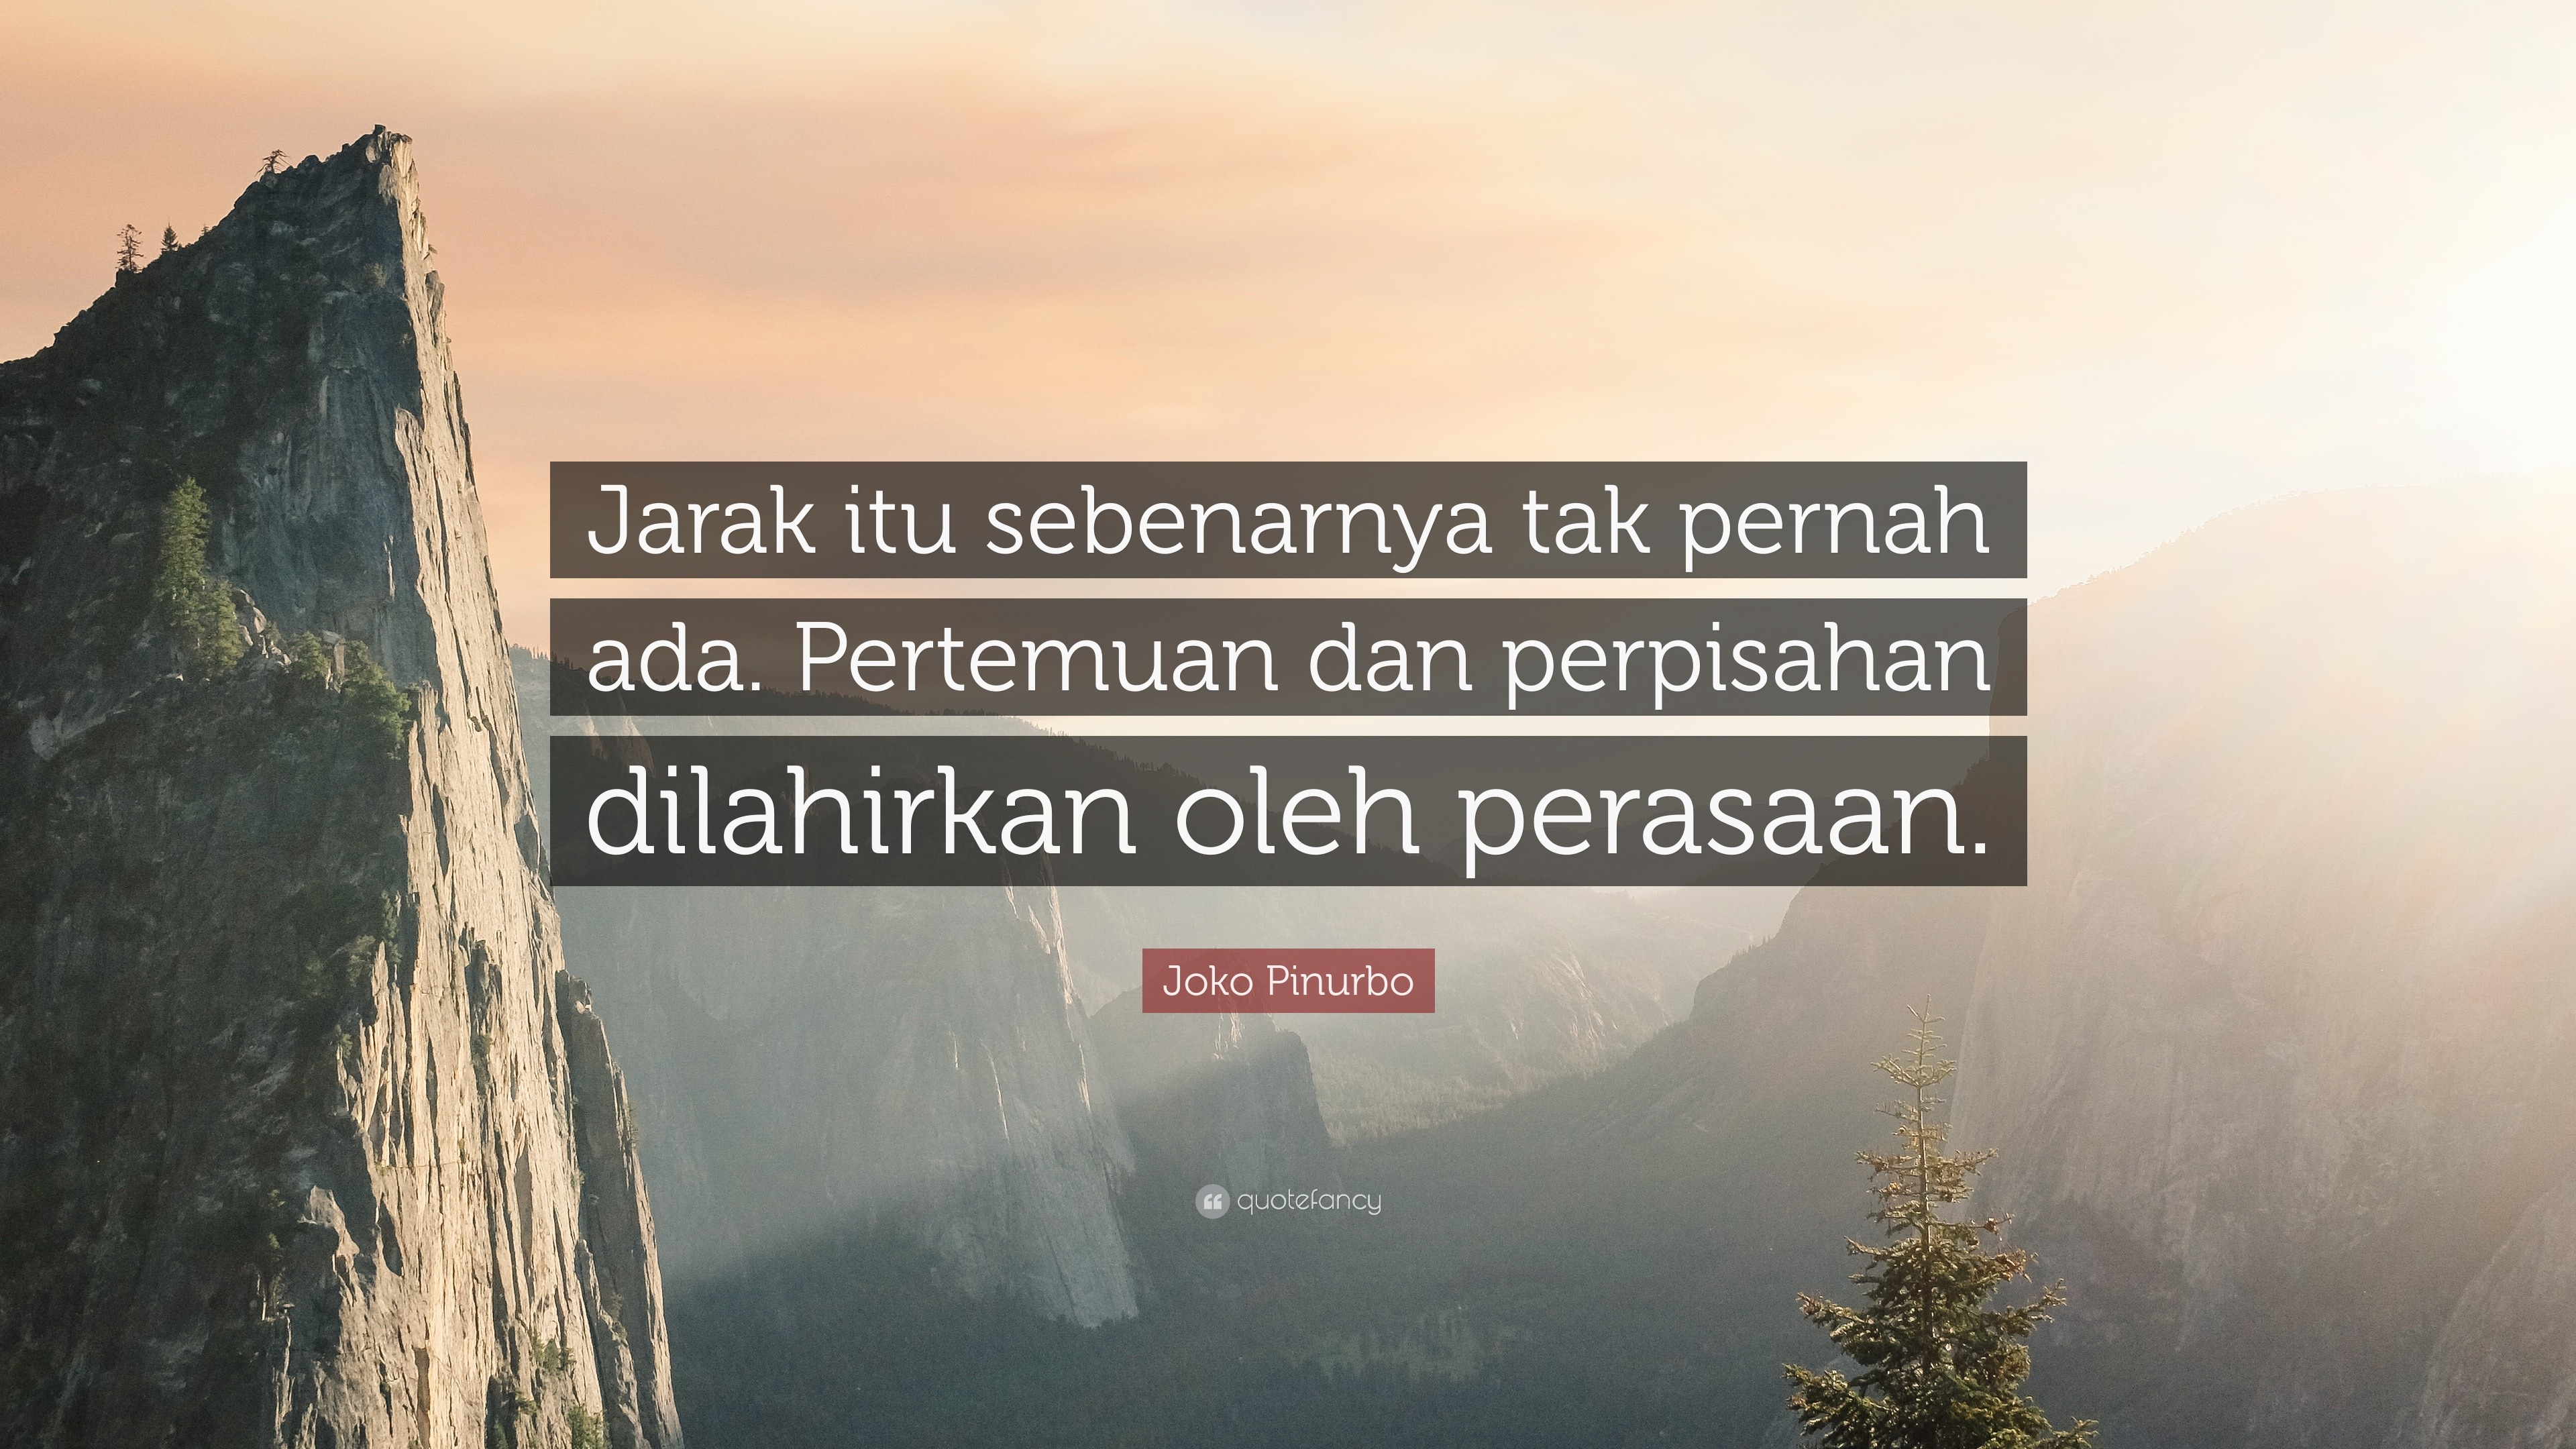 Quotes Perpisahan / Perpisahan Quotes: best 11 famous quotes about